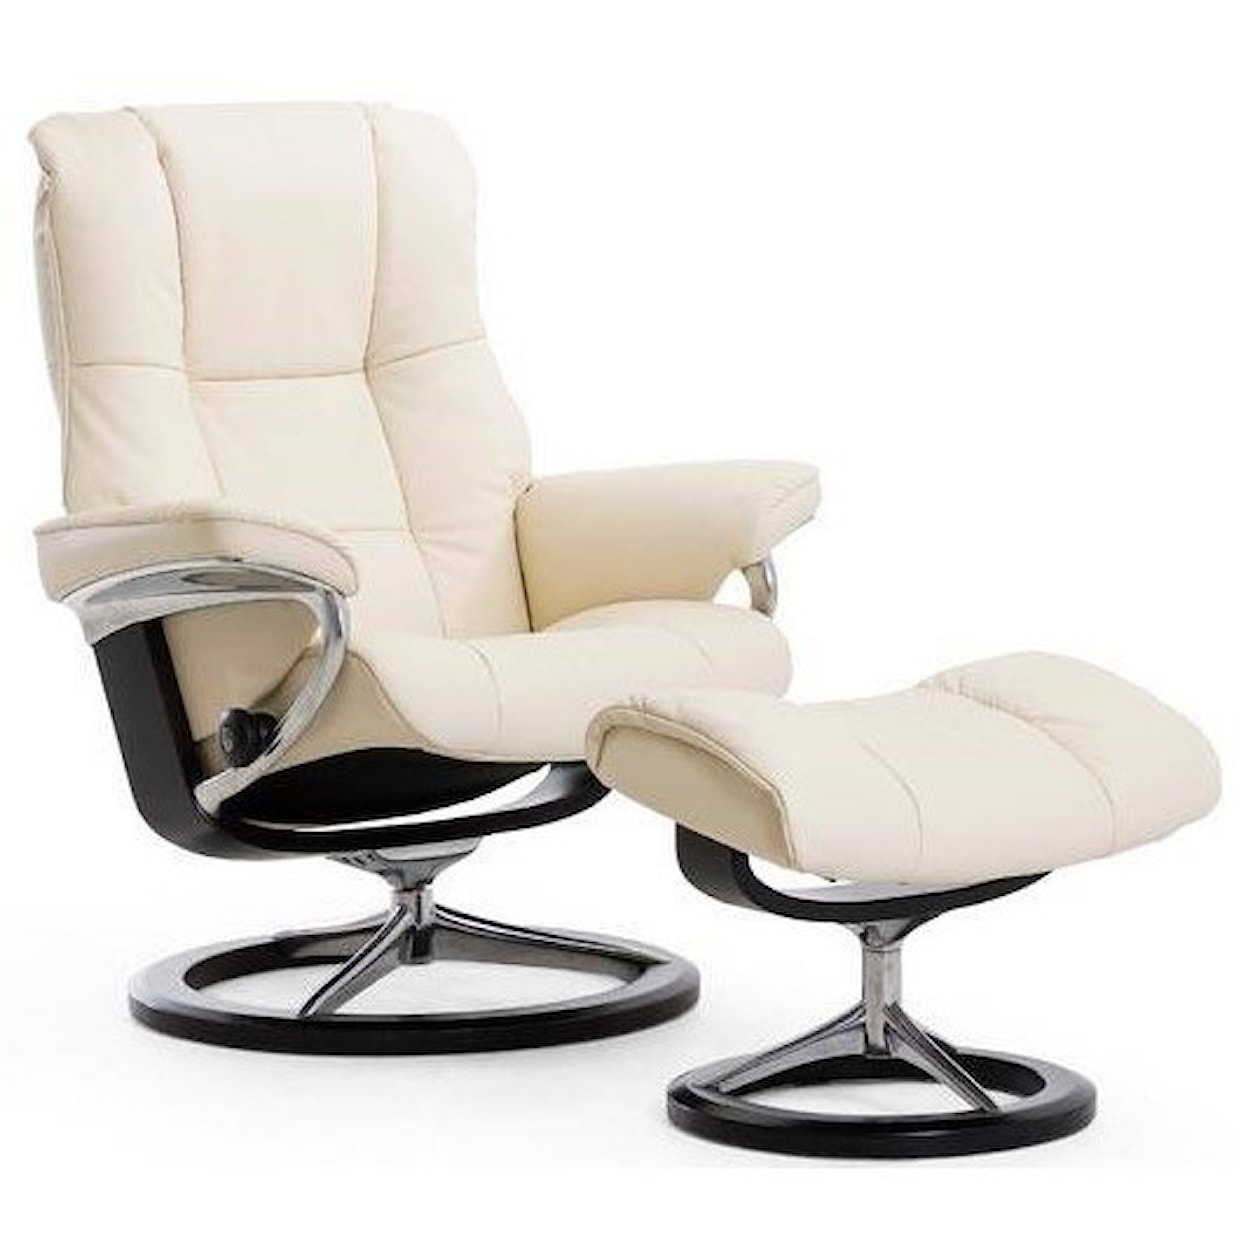 Stressless by Ekornes Mayfair Large Reclining Chair and Ottoman